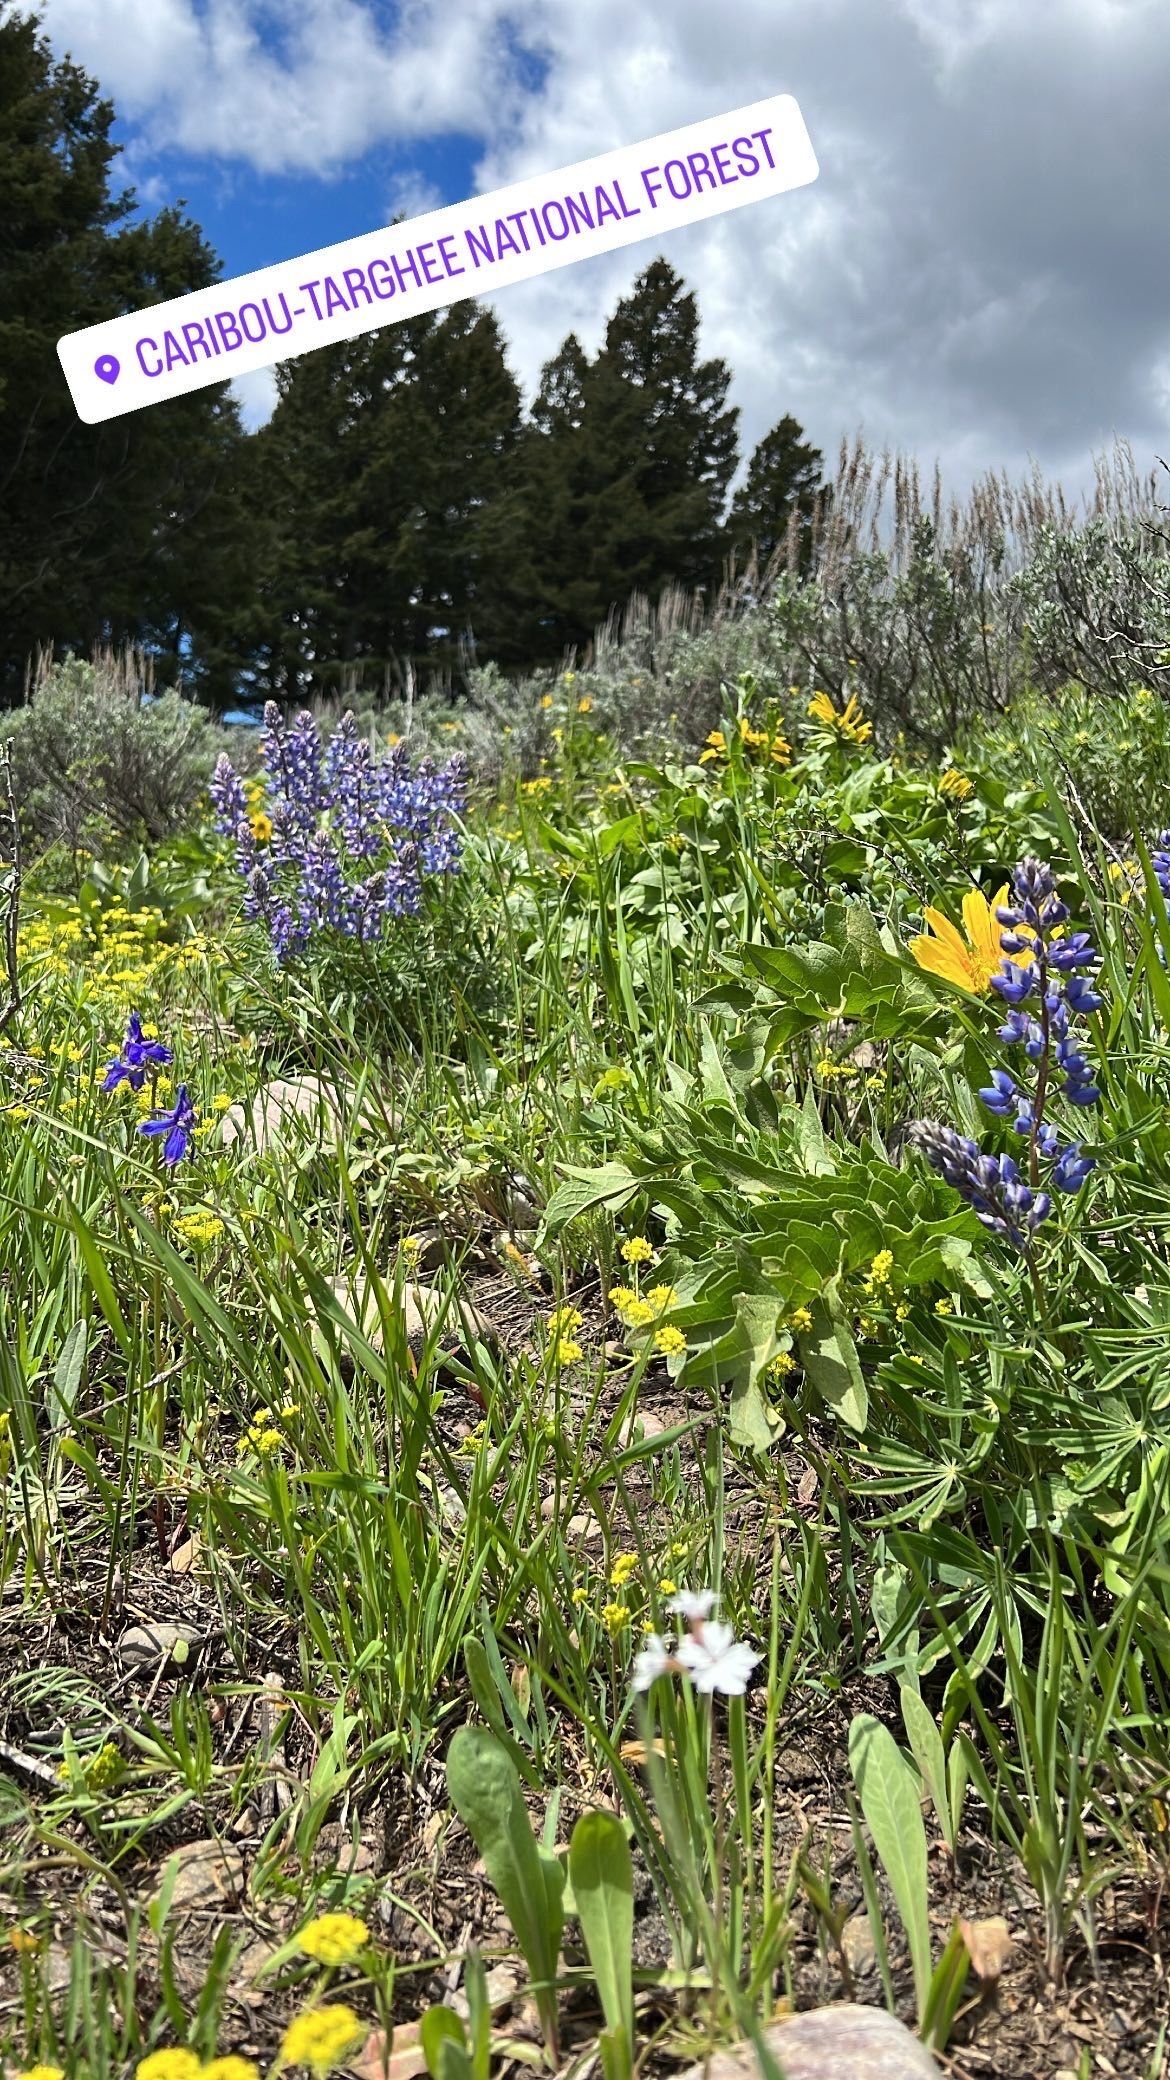 A field of lupine and arrowleaf balsamroot with a sticker in the upper left corner that says "Caribou-Targee National Forest"